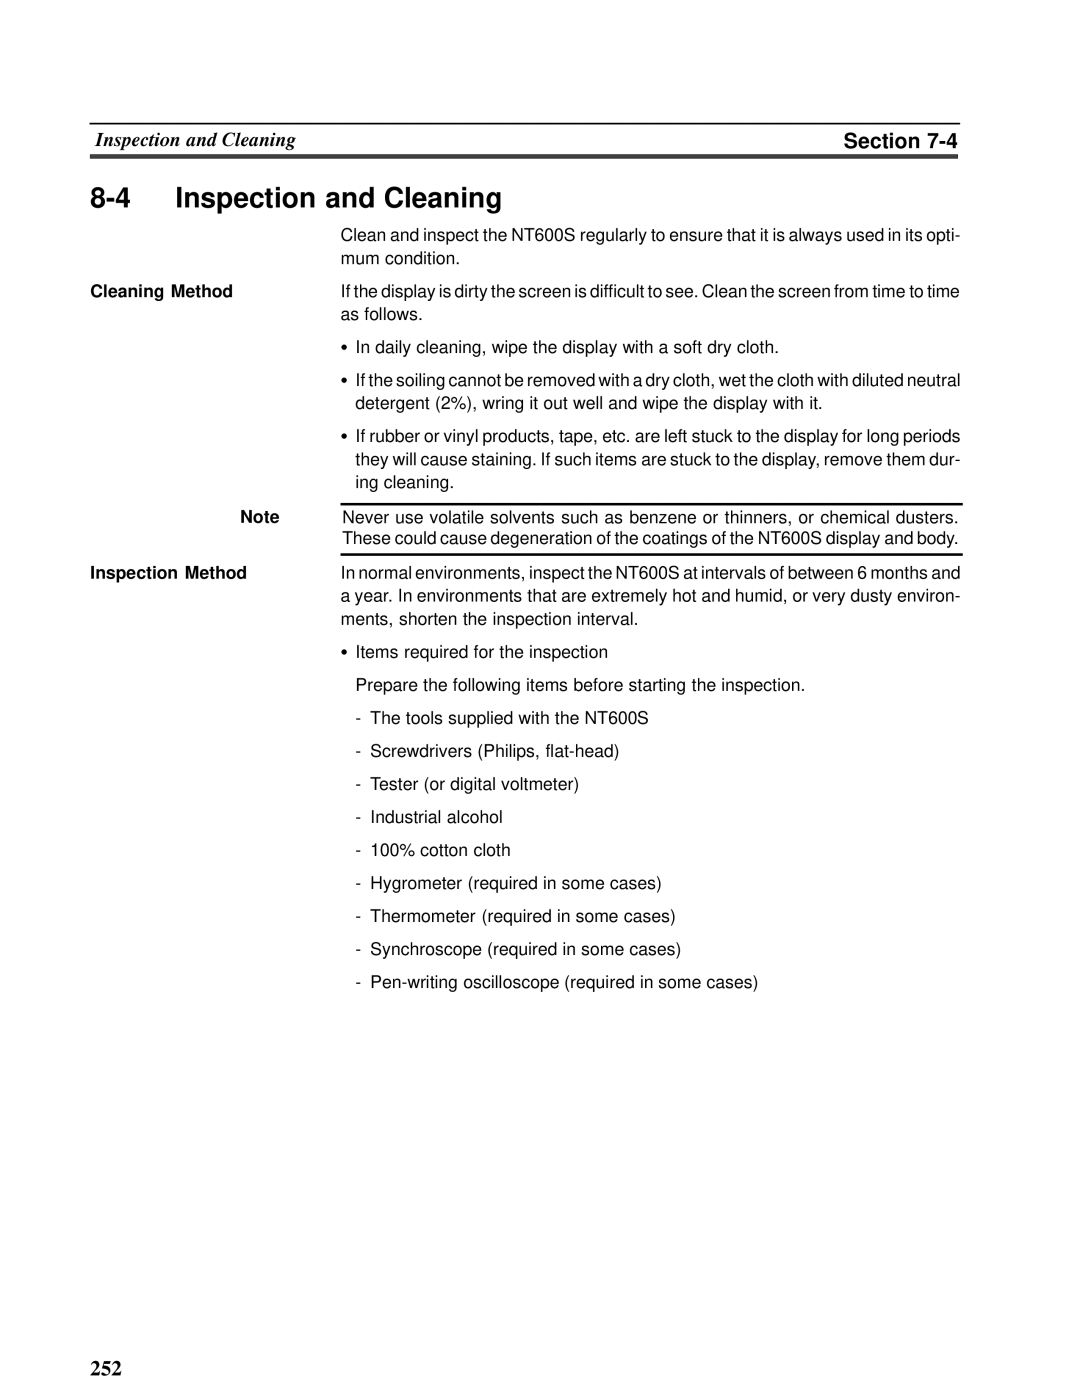 Omron V022-E3-1 operation manual Inspection and Cleaning, Section, Cleaning Method, Inspection Method 